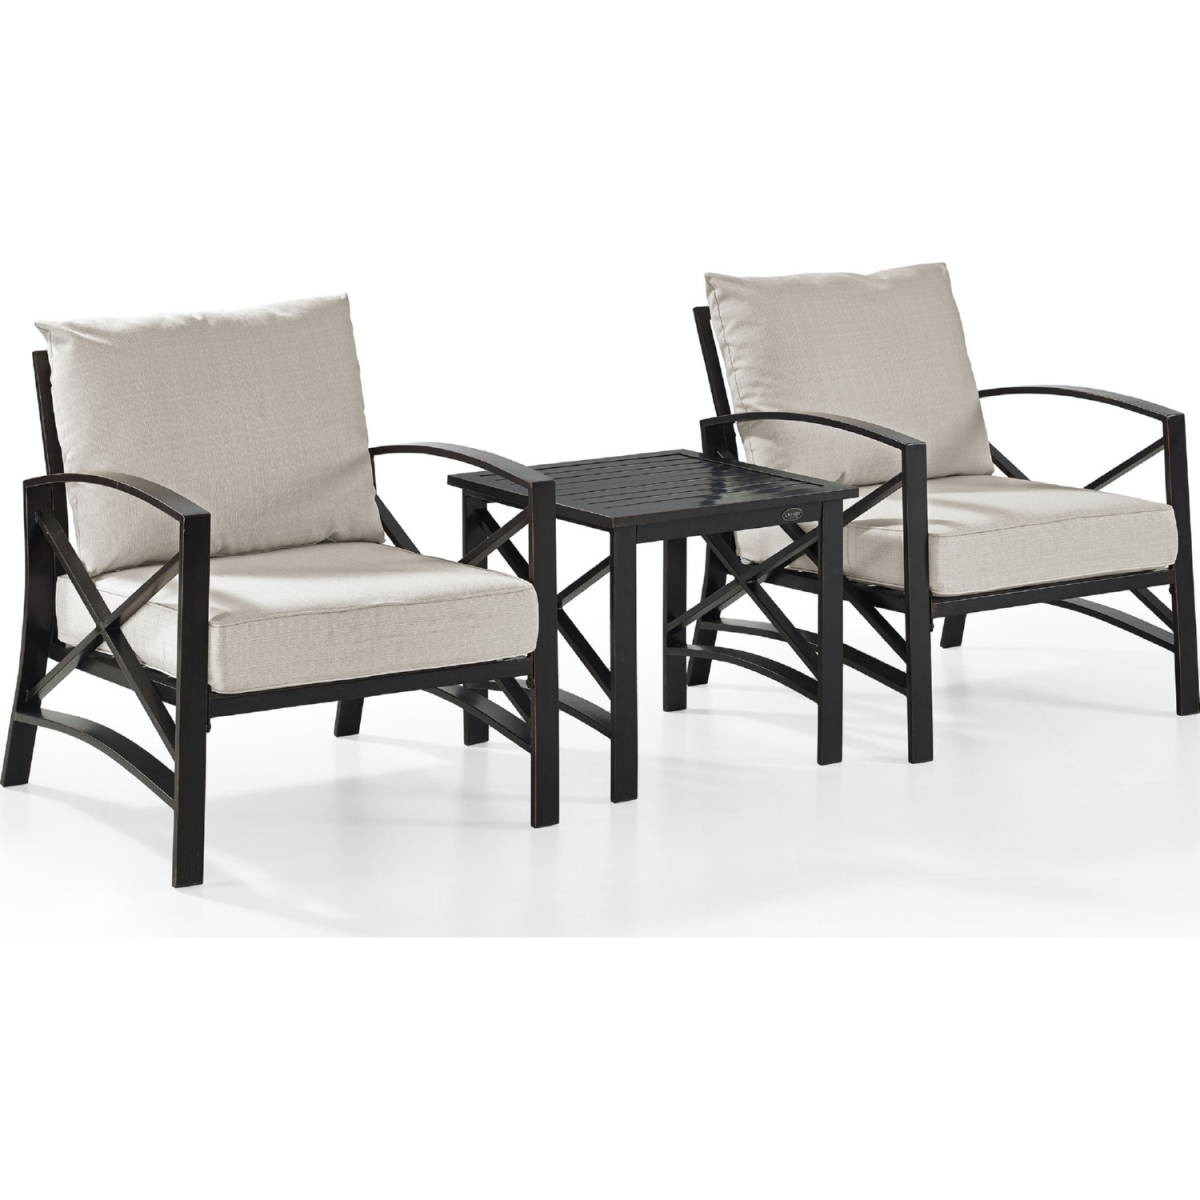 3 Piece Kaplan Outdoor Seating Set With Oatmeal Cushion - Two Chairs, Side Table